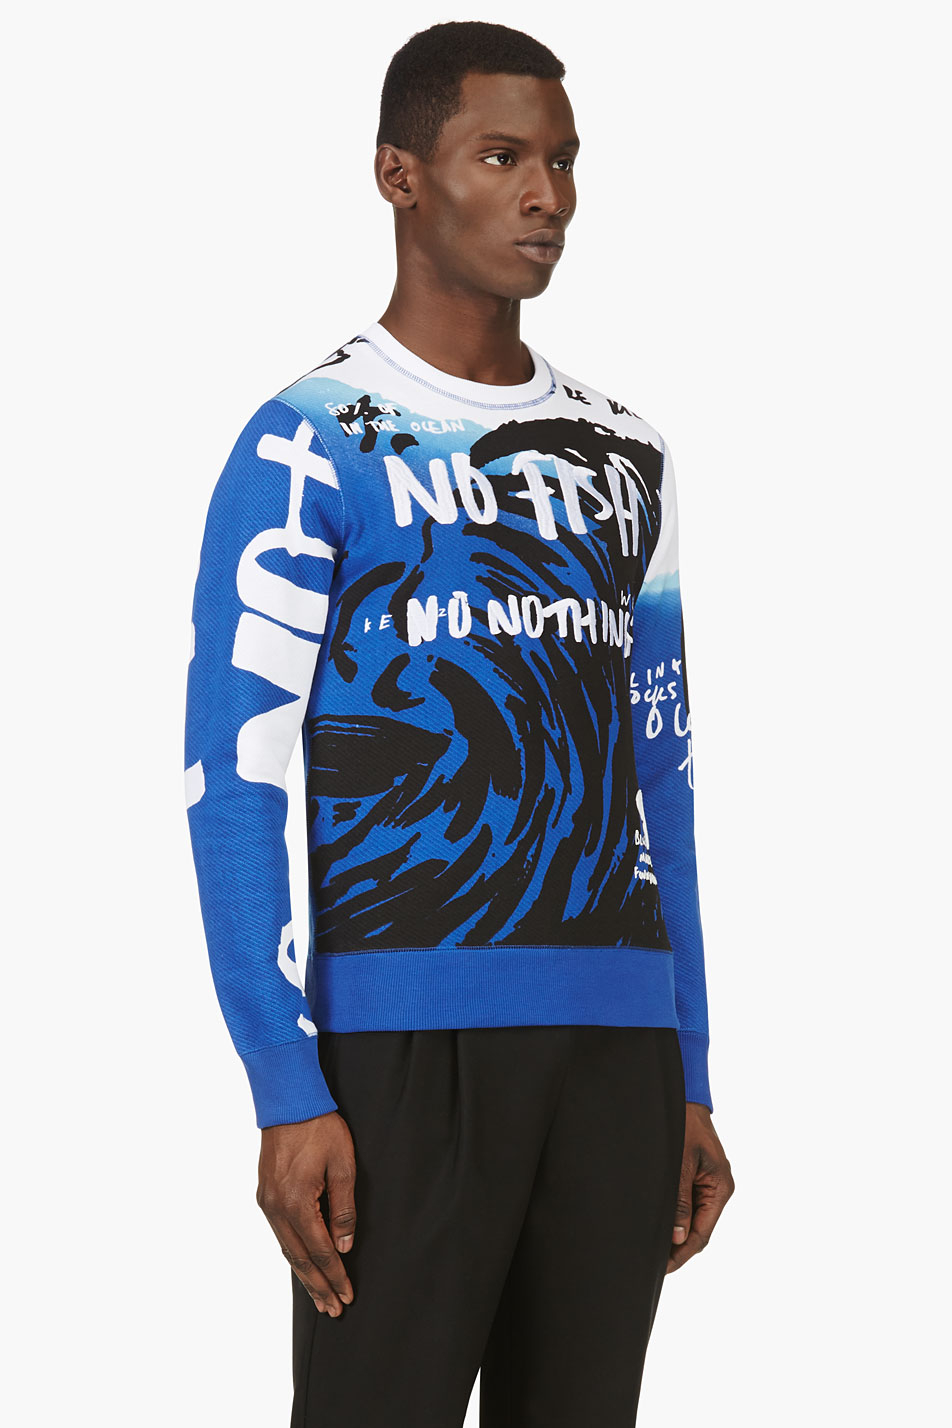 KENZO No Fish Not Nothing Sweater in Blue for Men - Lyst